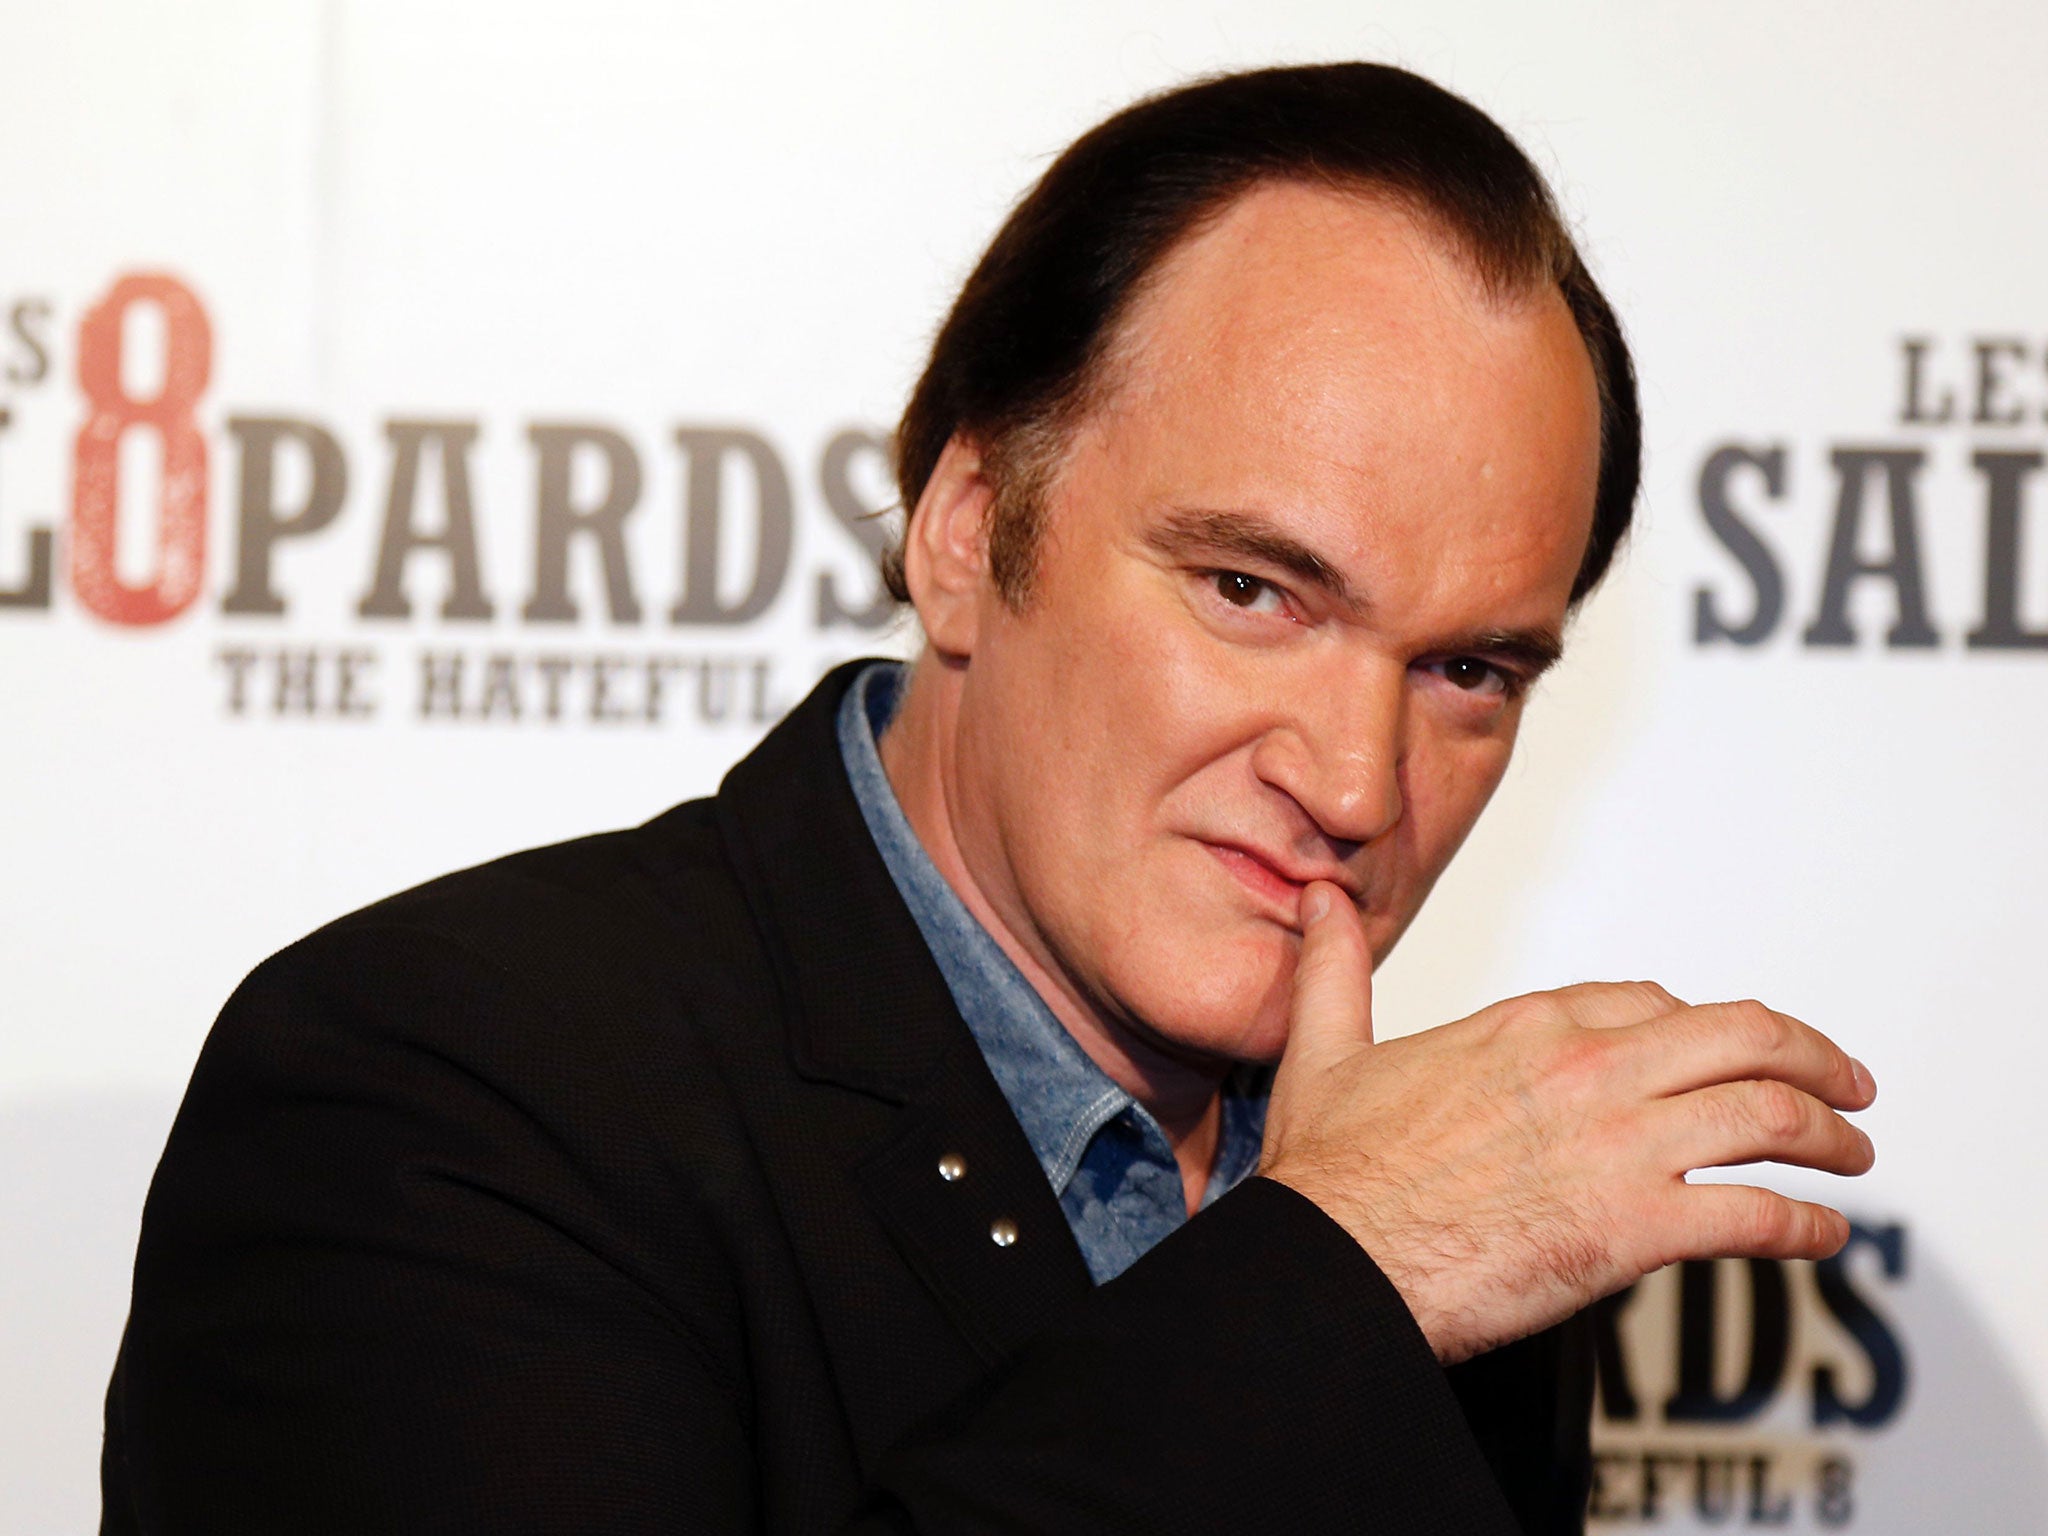 &#13;
Quentin Tarantino’s The Hateful Eight was named Best Original Soundtrack &#13;